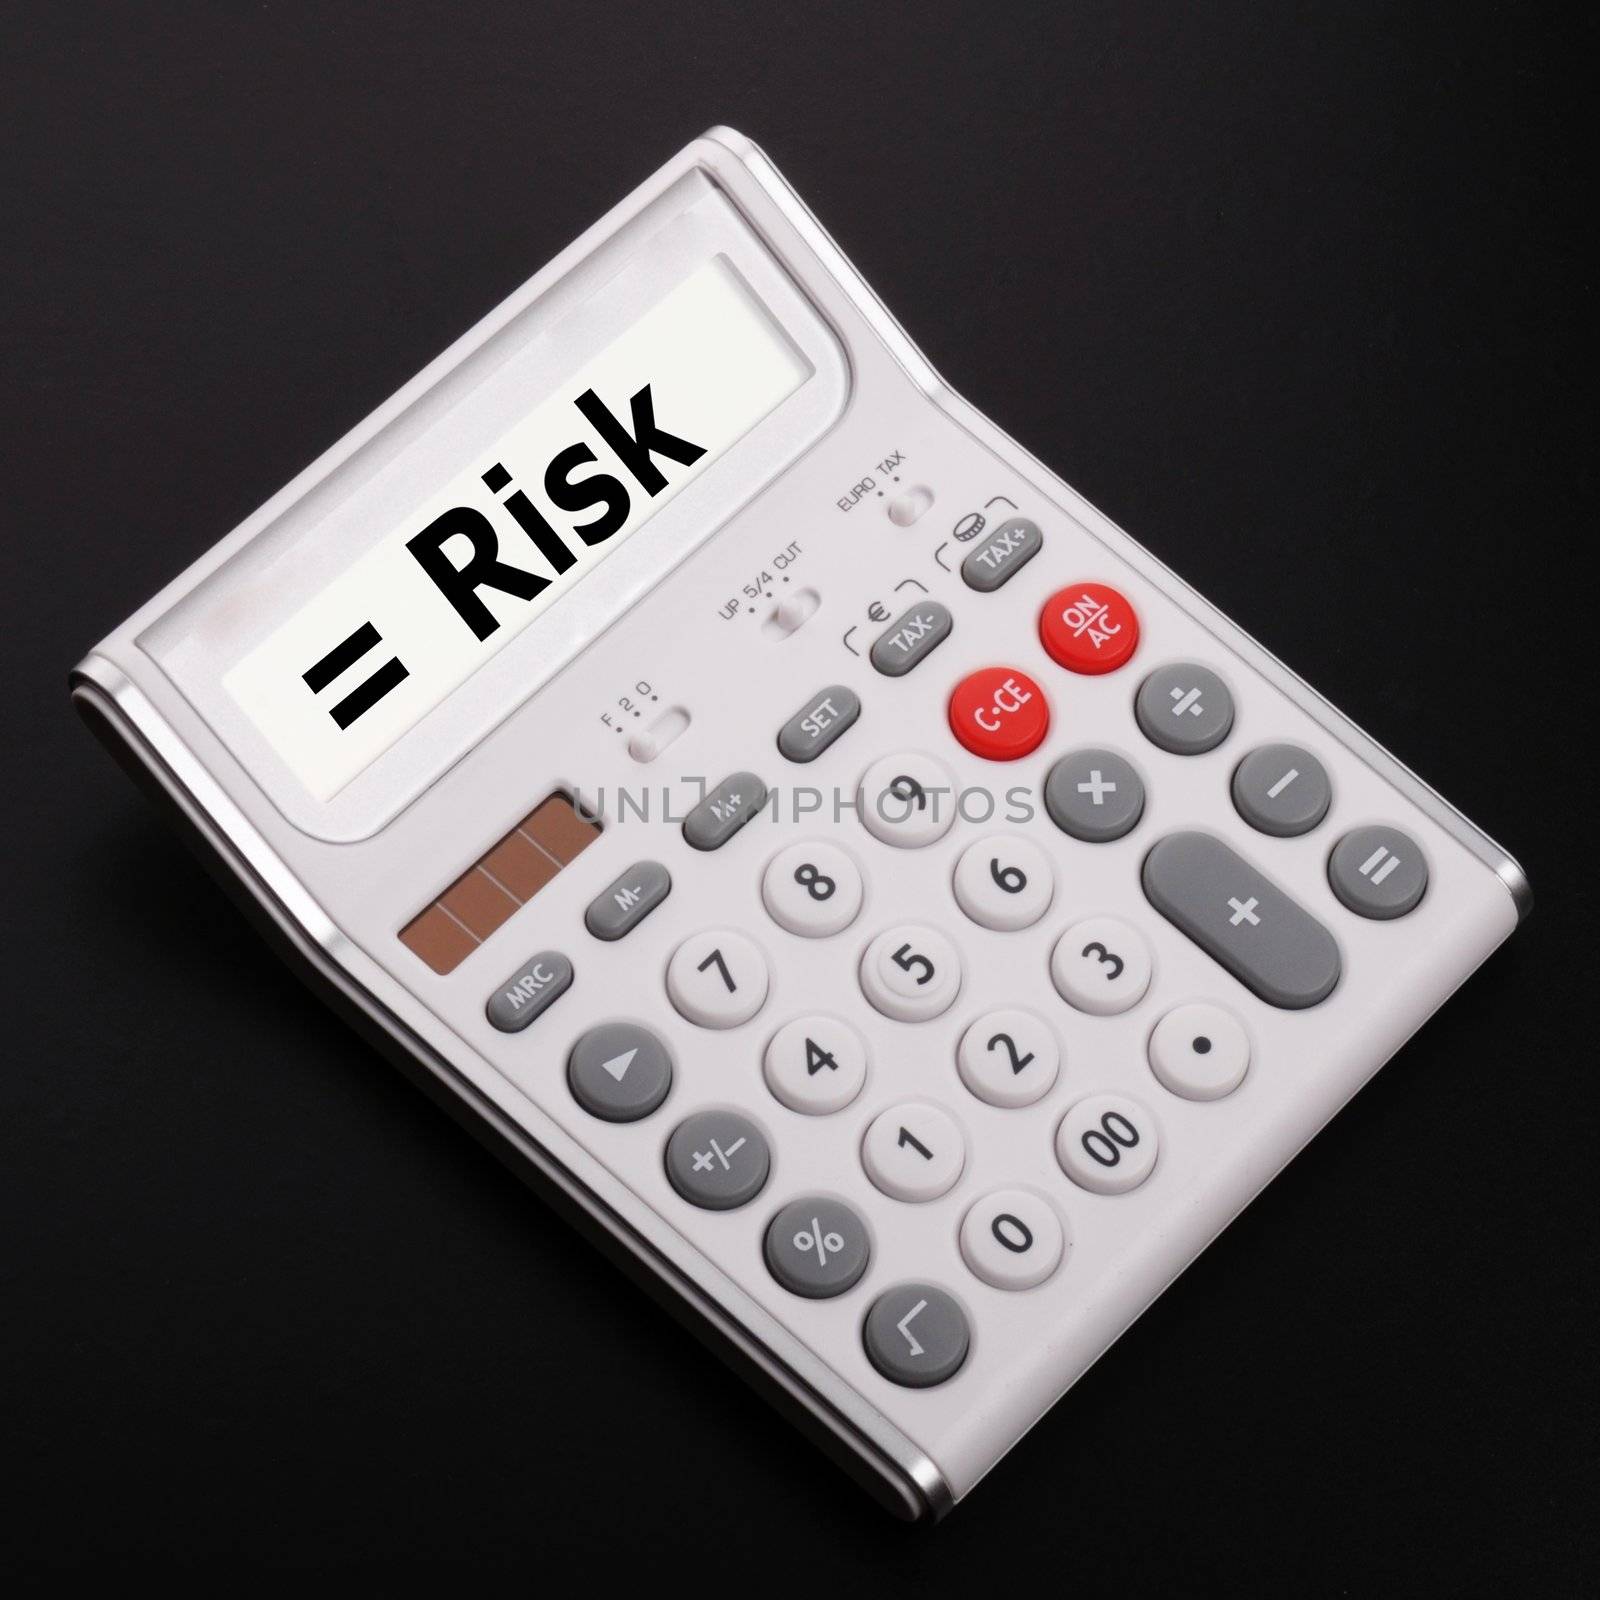 risk management concept with calculator showing financial success